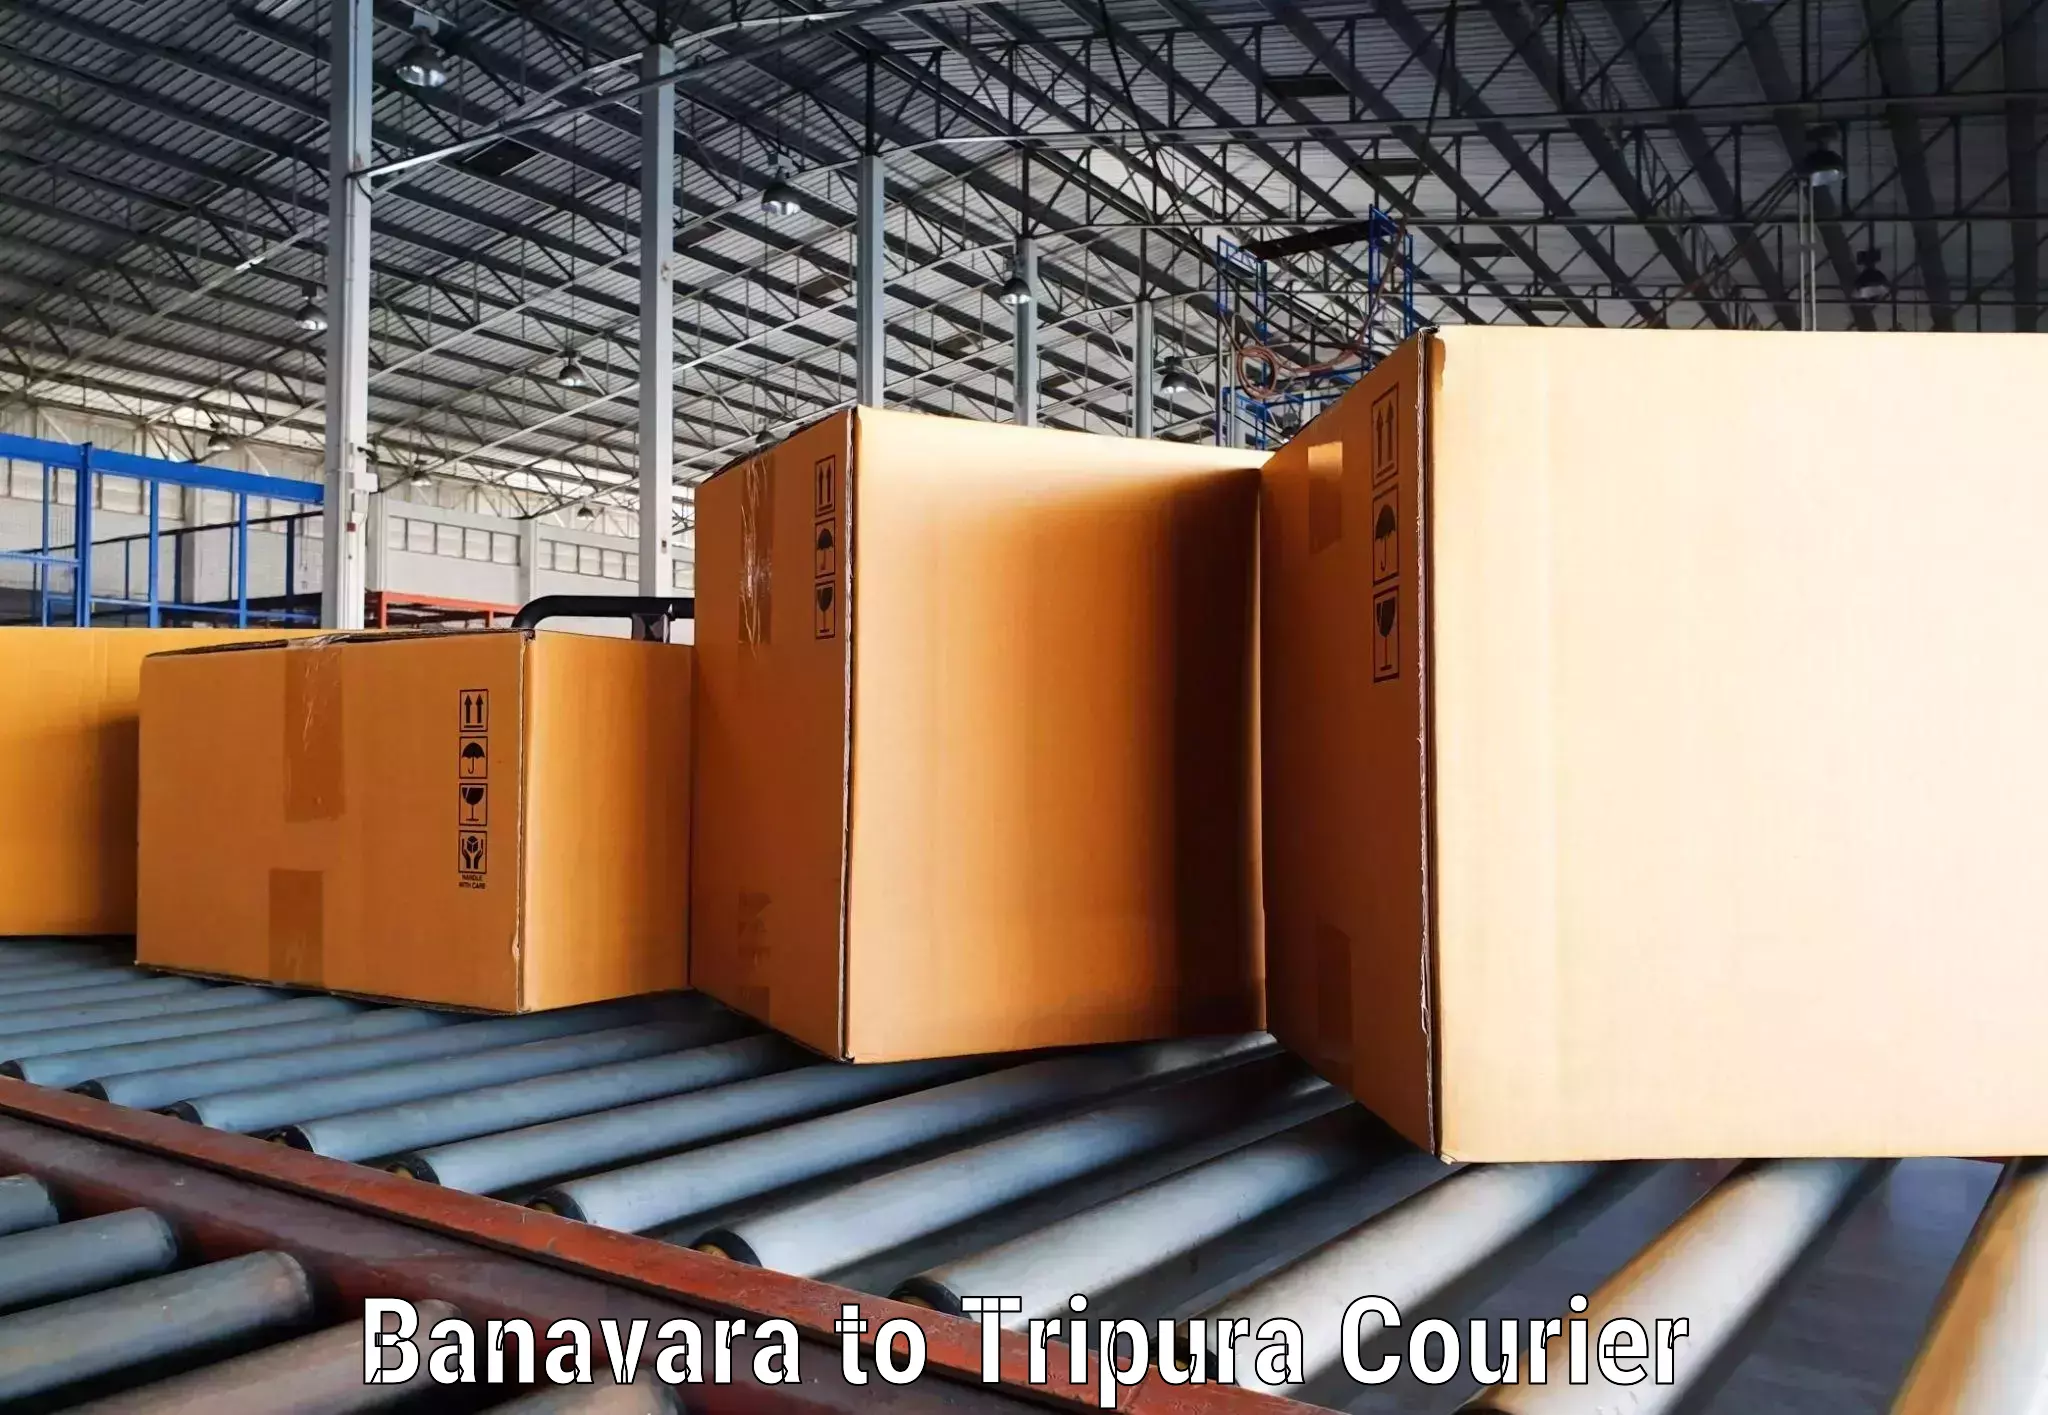 State-of-the-art courier technology Banavara to Udaipur Tripura